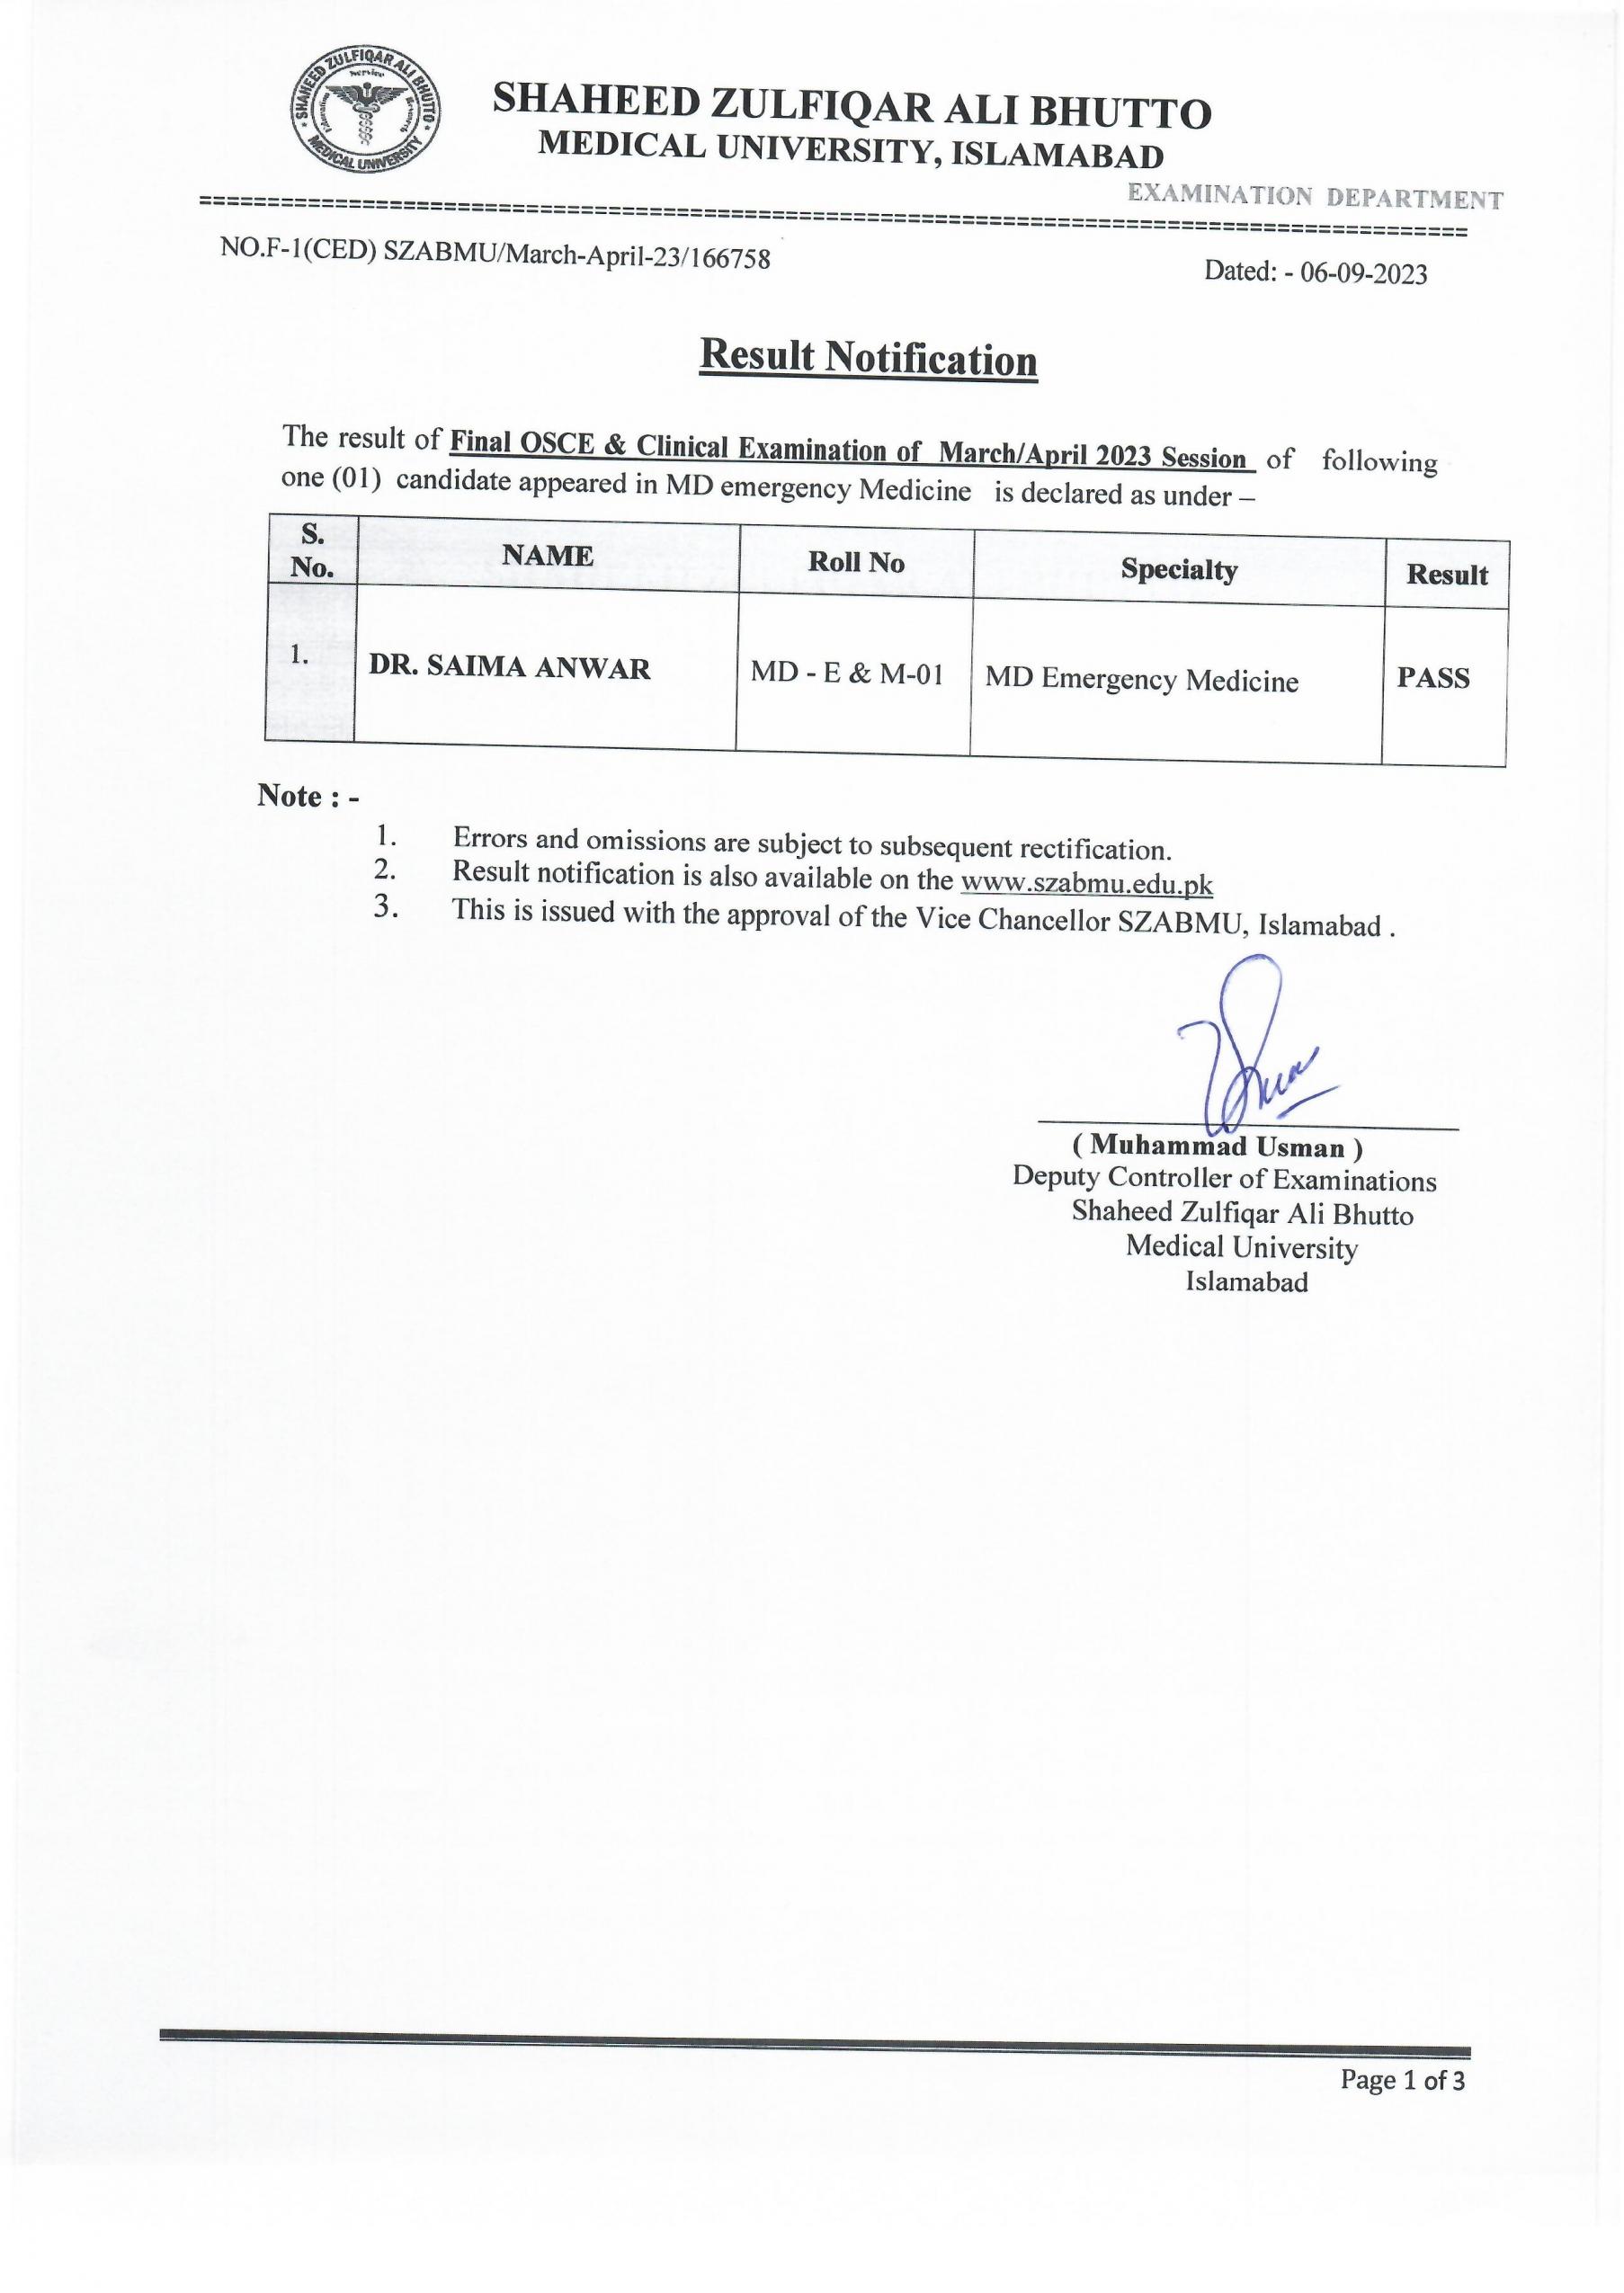 Result notification OSCE Clinical Examination March/April 2023 session